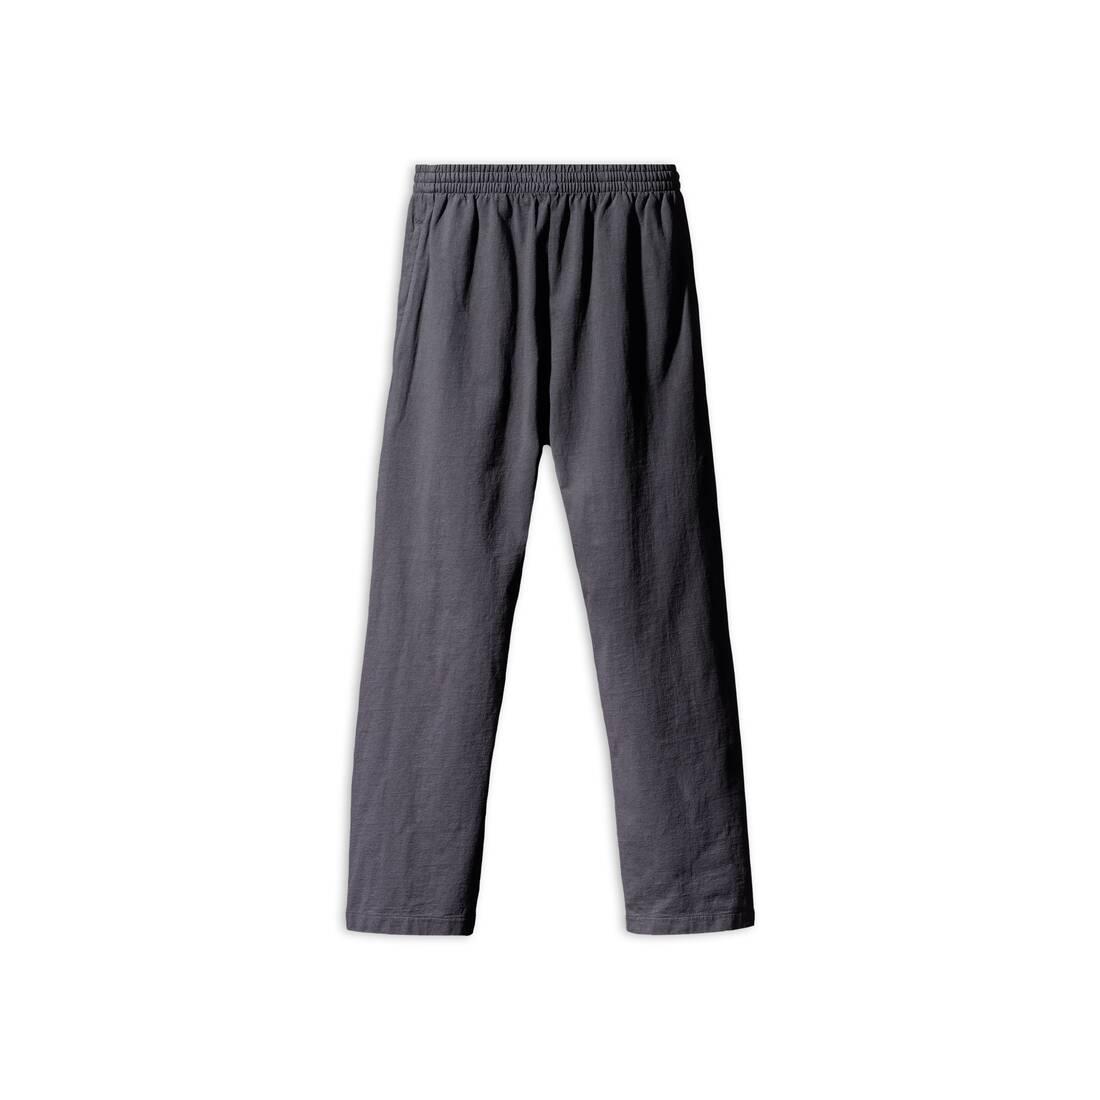 Balenciaga Yeezy Gap Engineered By Fitted Sweatpants in Black | Lyst